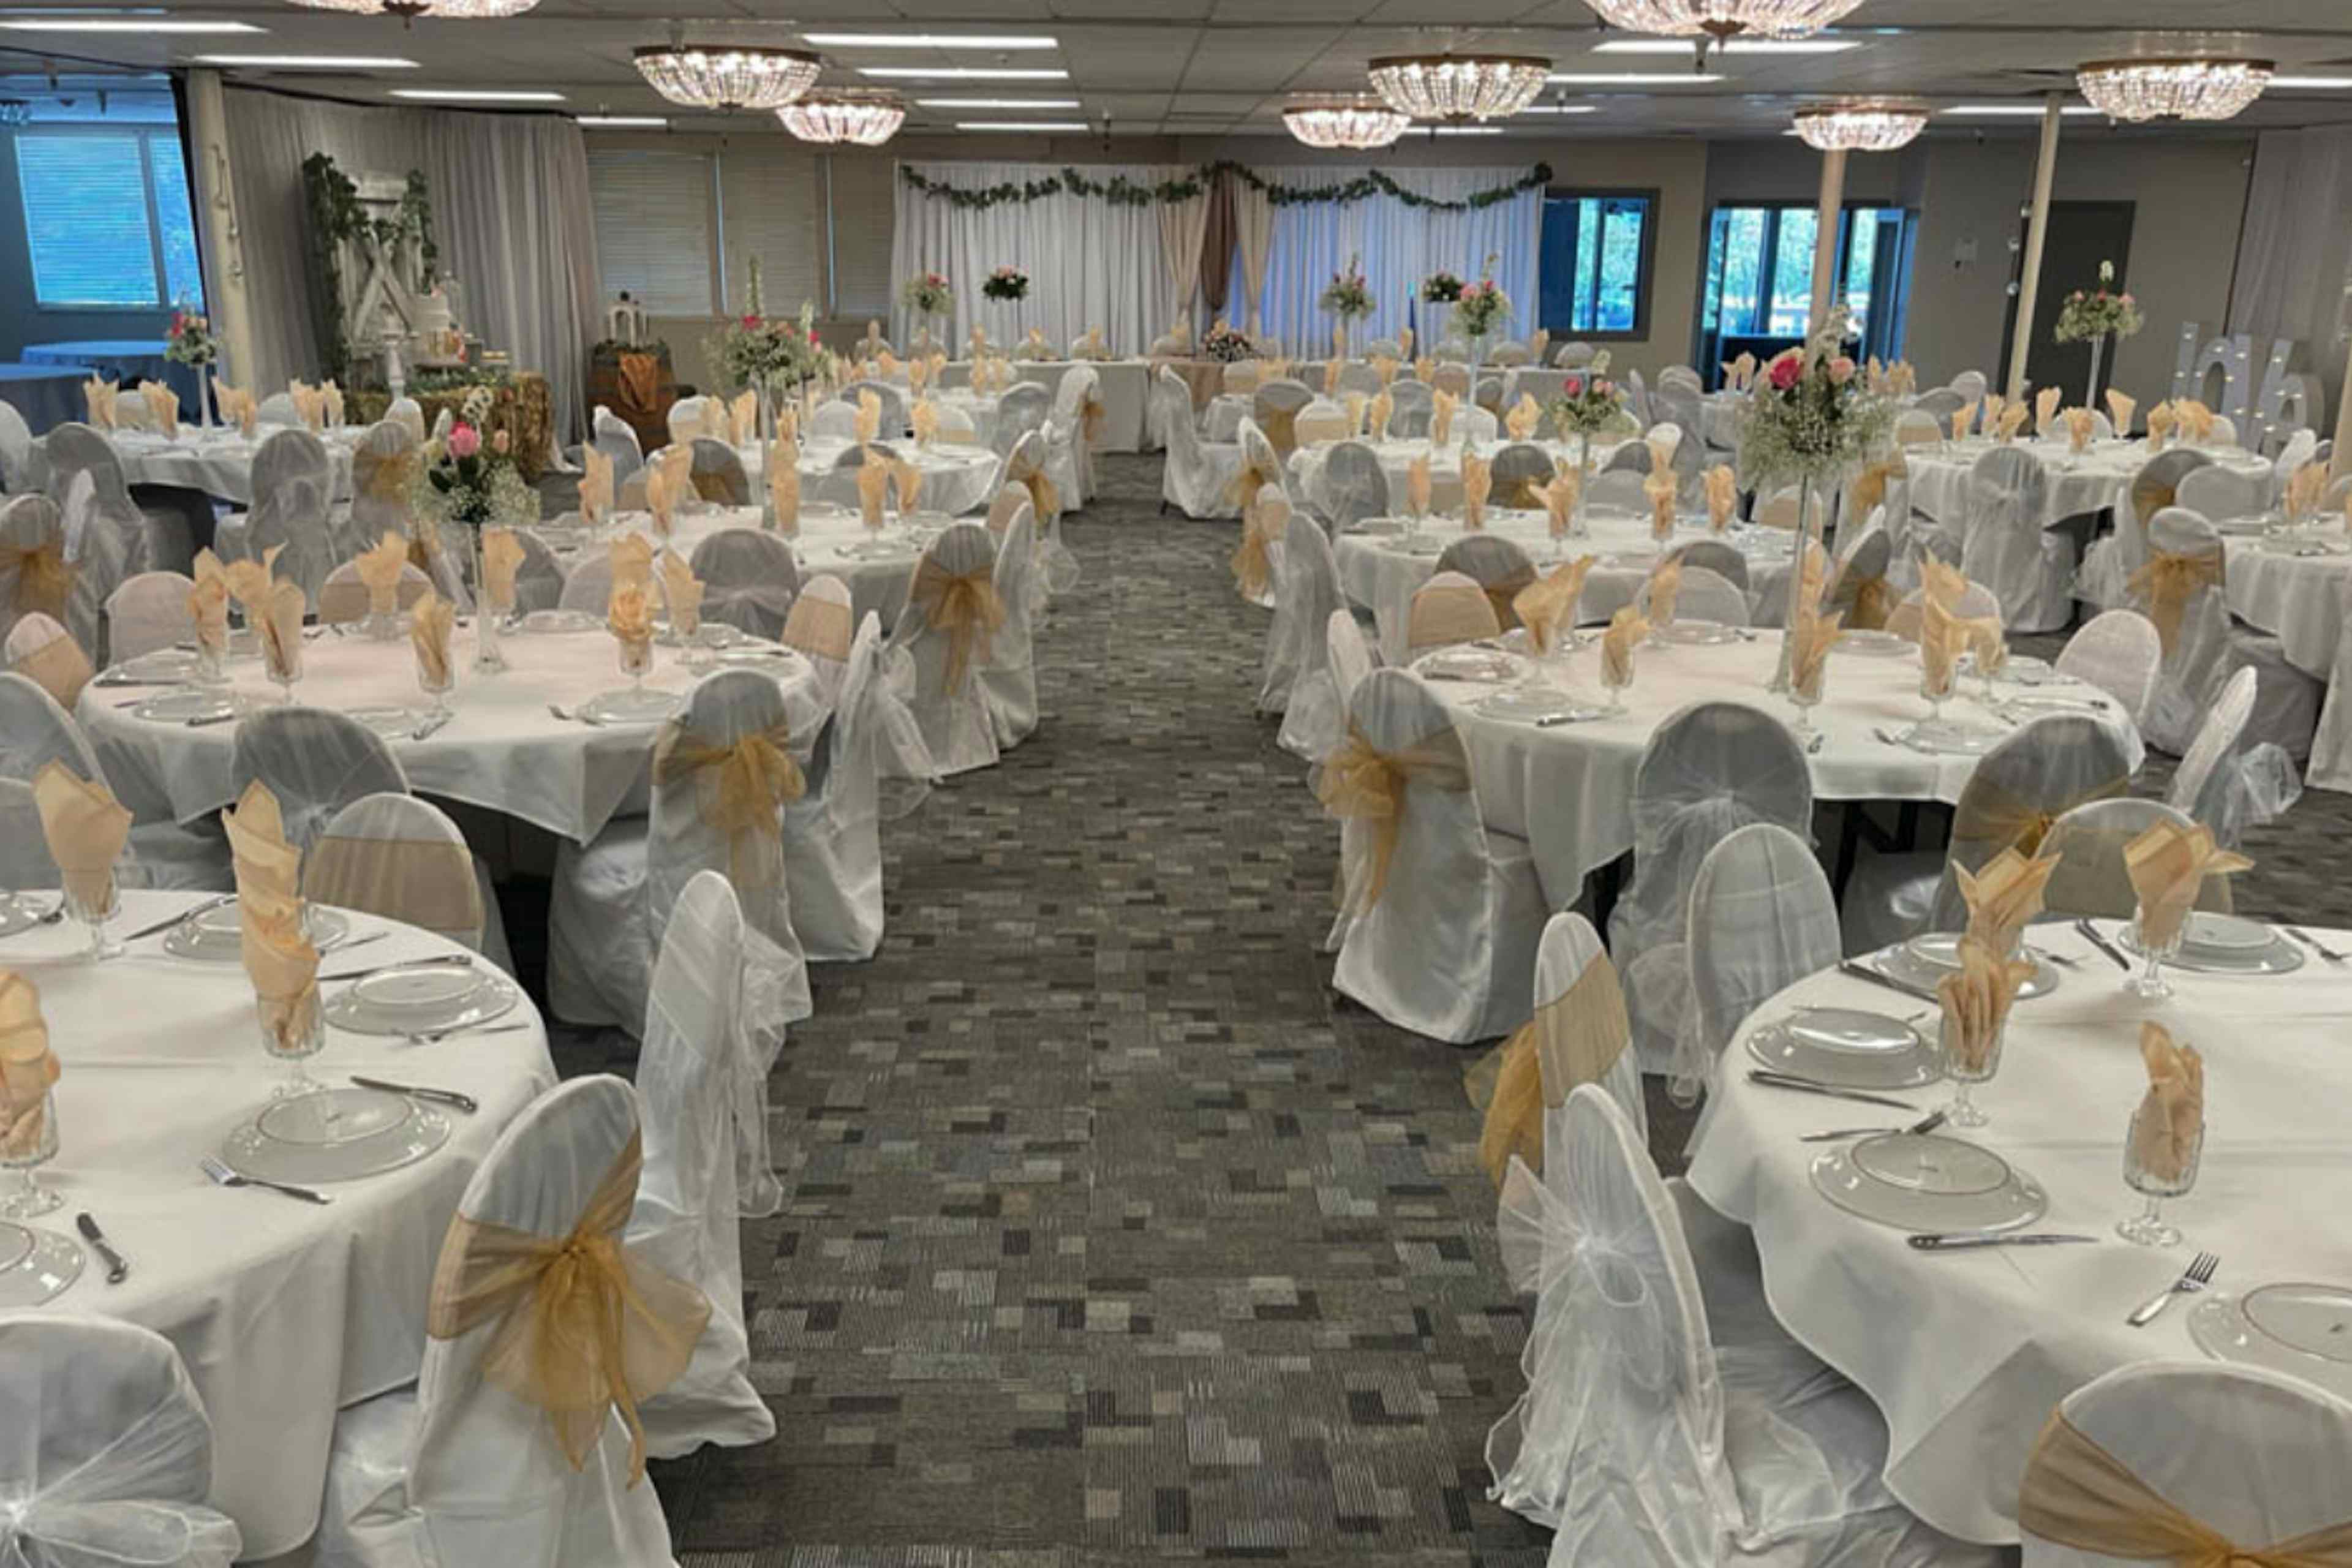 Multiple tables and chairs are arranged, adorned with plates, cups, and silverware, in preparation for a reception in Idaho Falls, Idaho.